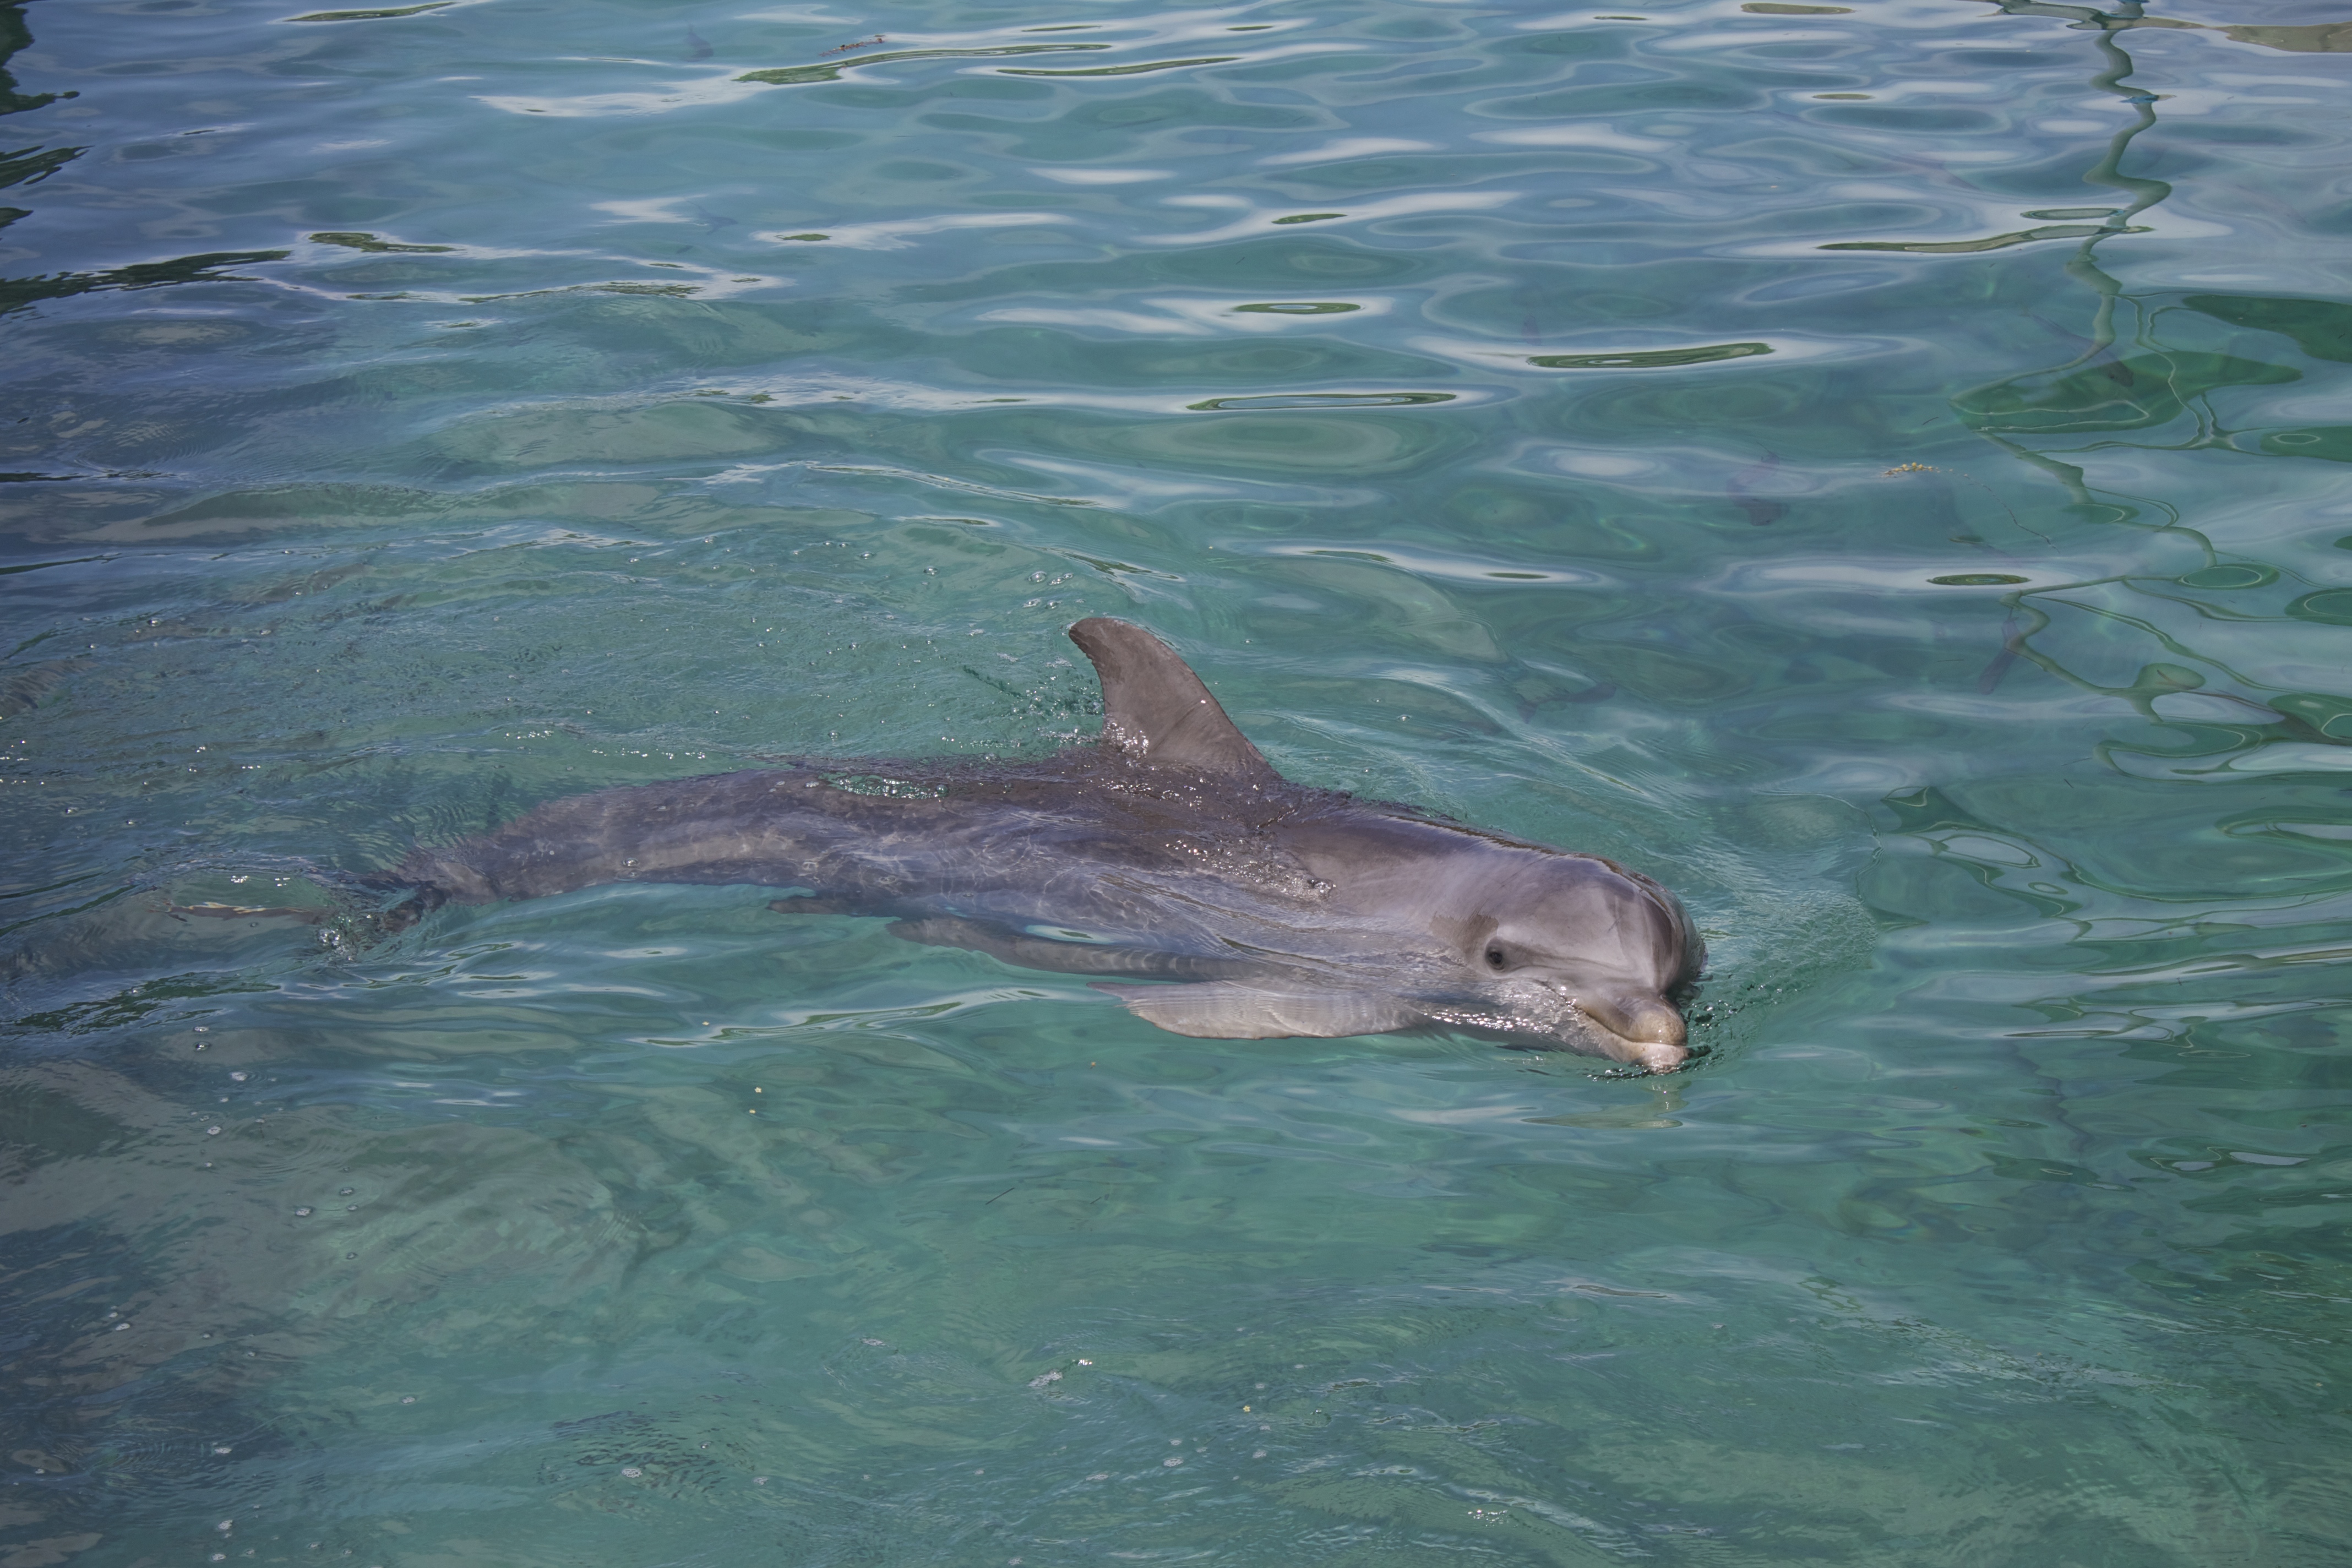 blue lagoon island-pictures of dolphins in water 